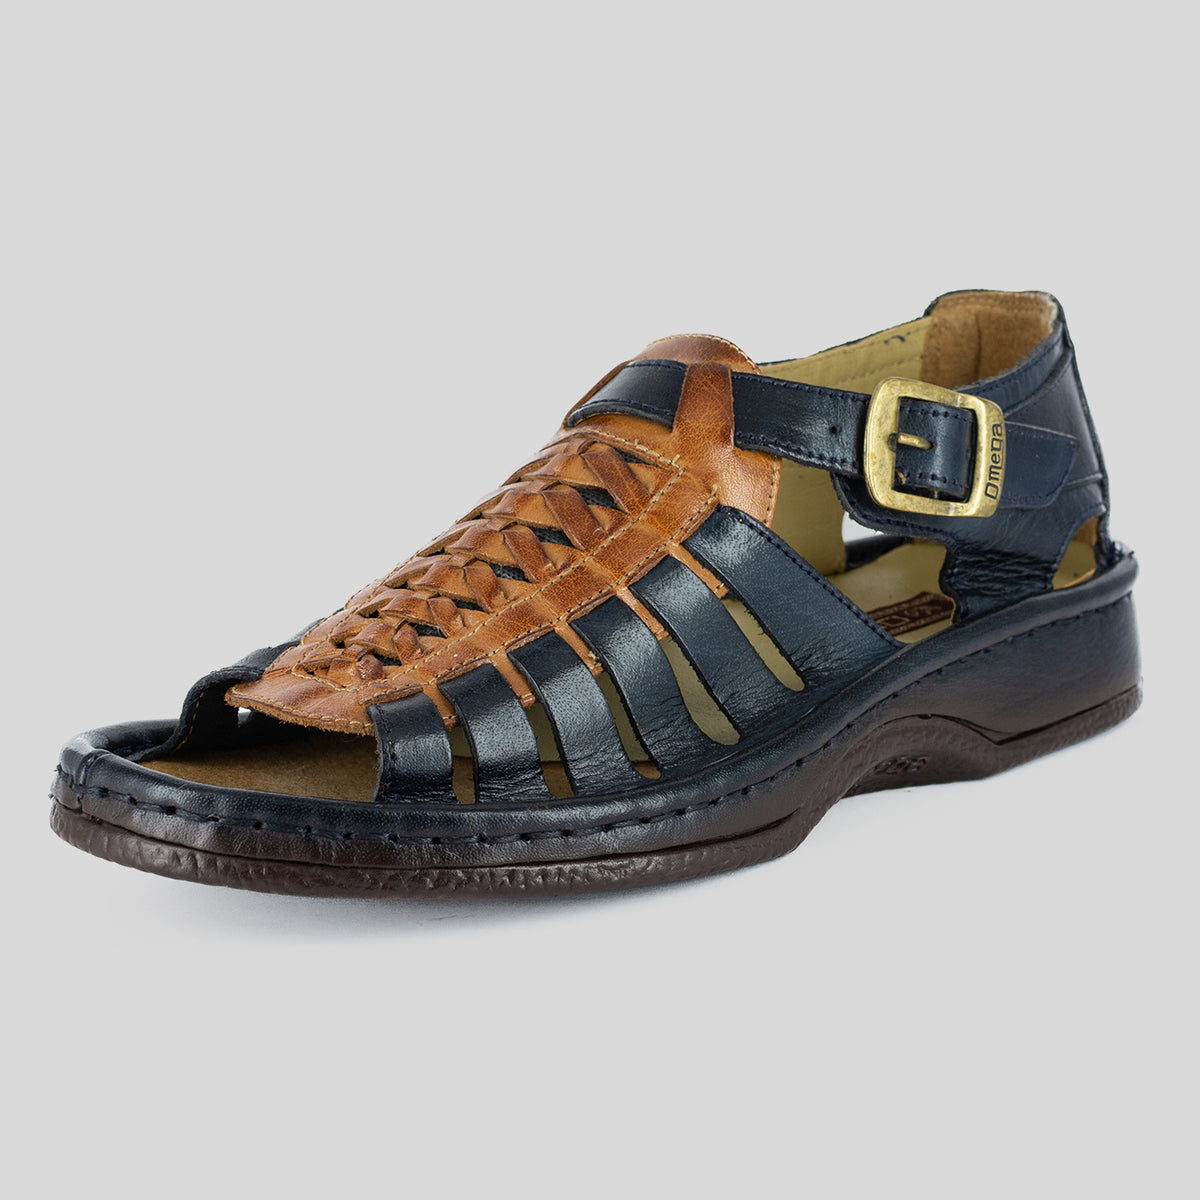 Kgosi : Leather Sandal in Navy & Bronze Buffalo Leather